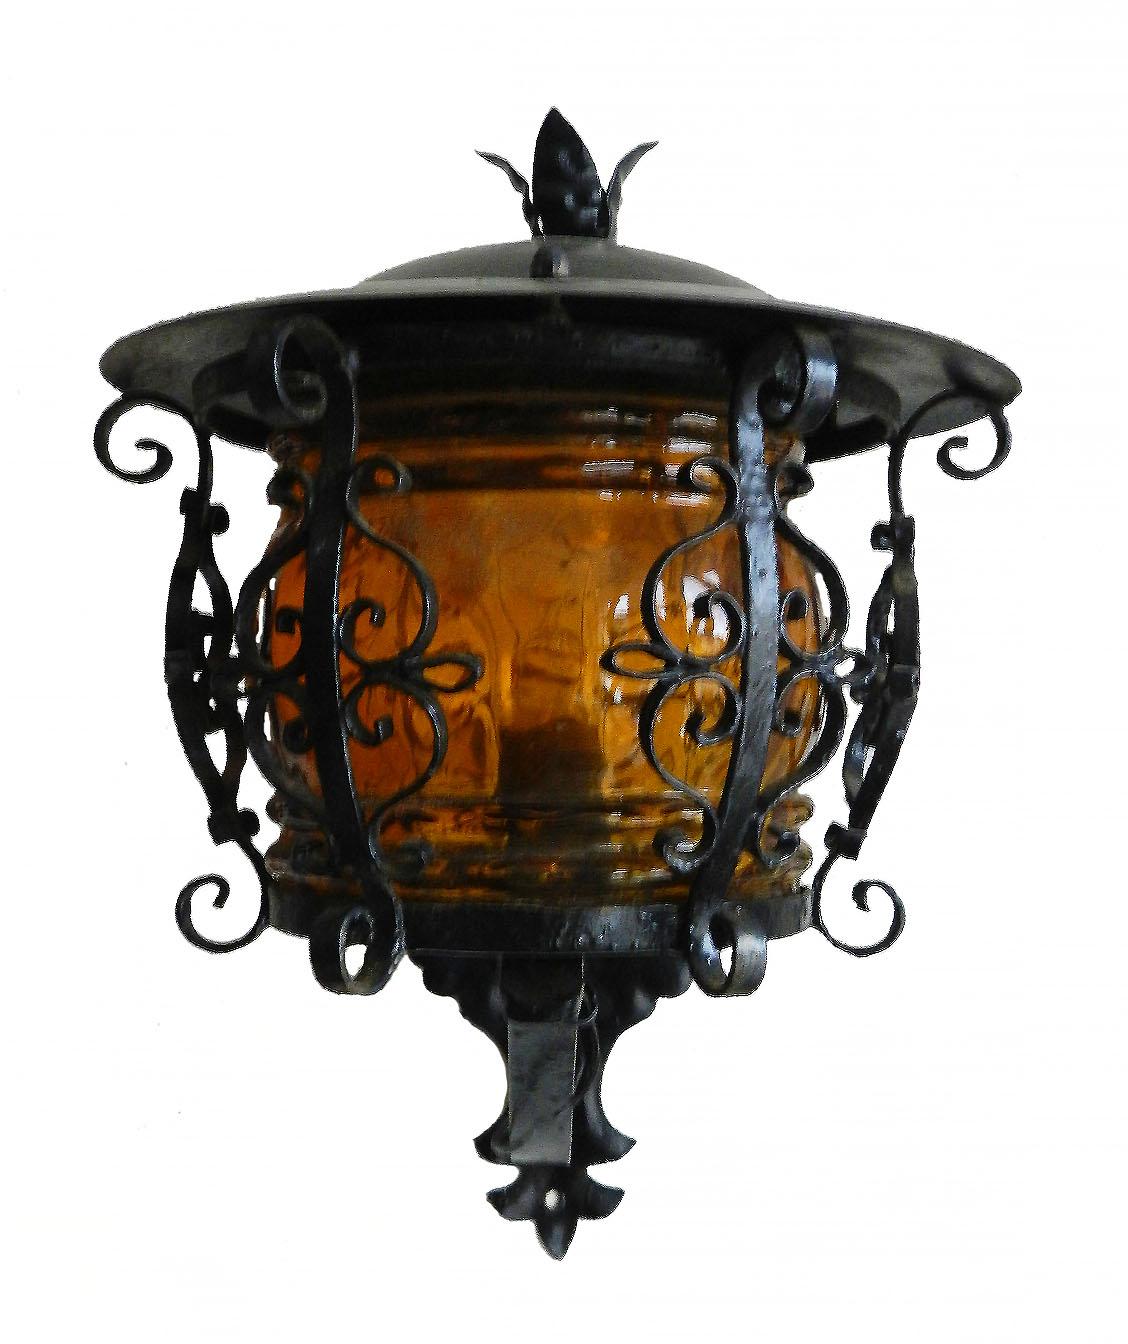 Outdoor sconce exterior wall light lantern iron glass, French
Exterior wall light lantern sconce wrought iron and amber glass, circa 1920
Vintage old painted wrought iron could be re finished
Good vintage condition sound and solid
This can be